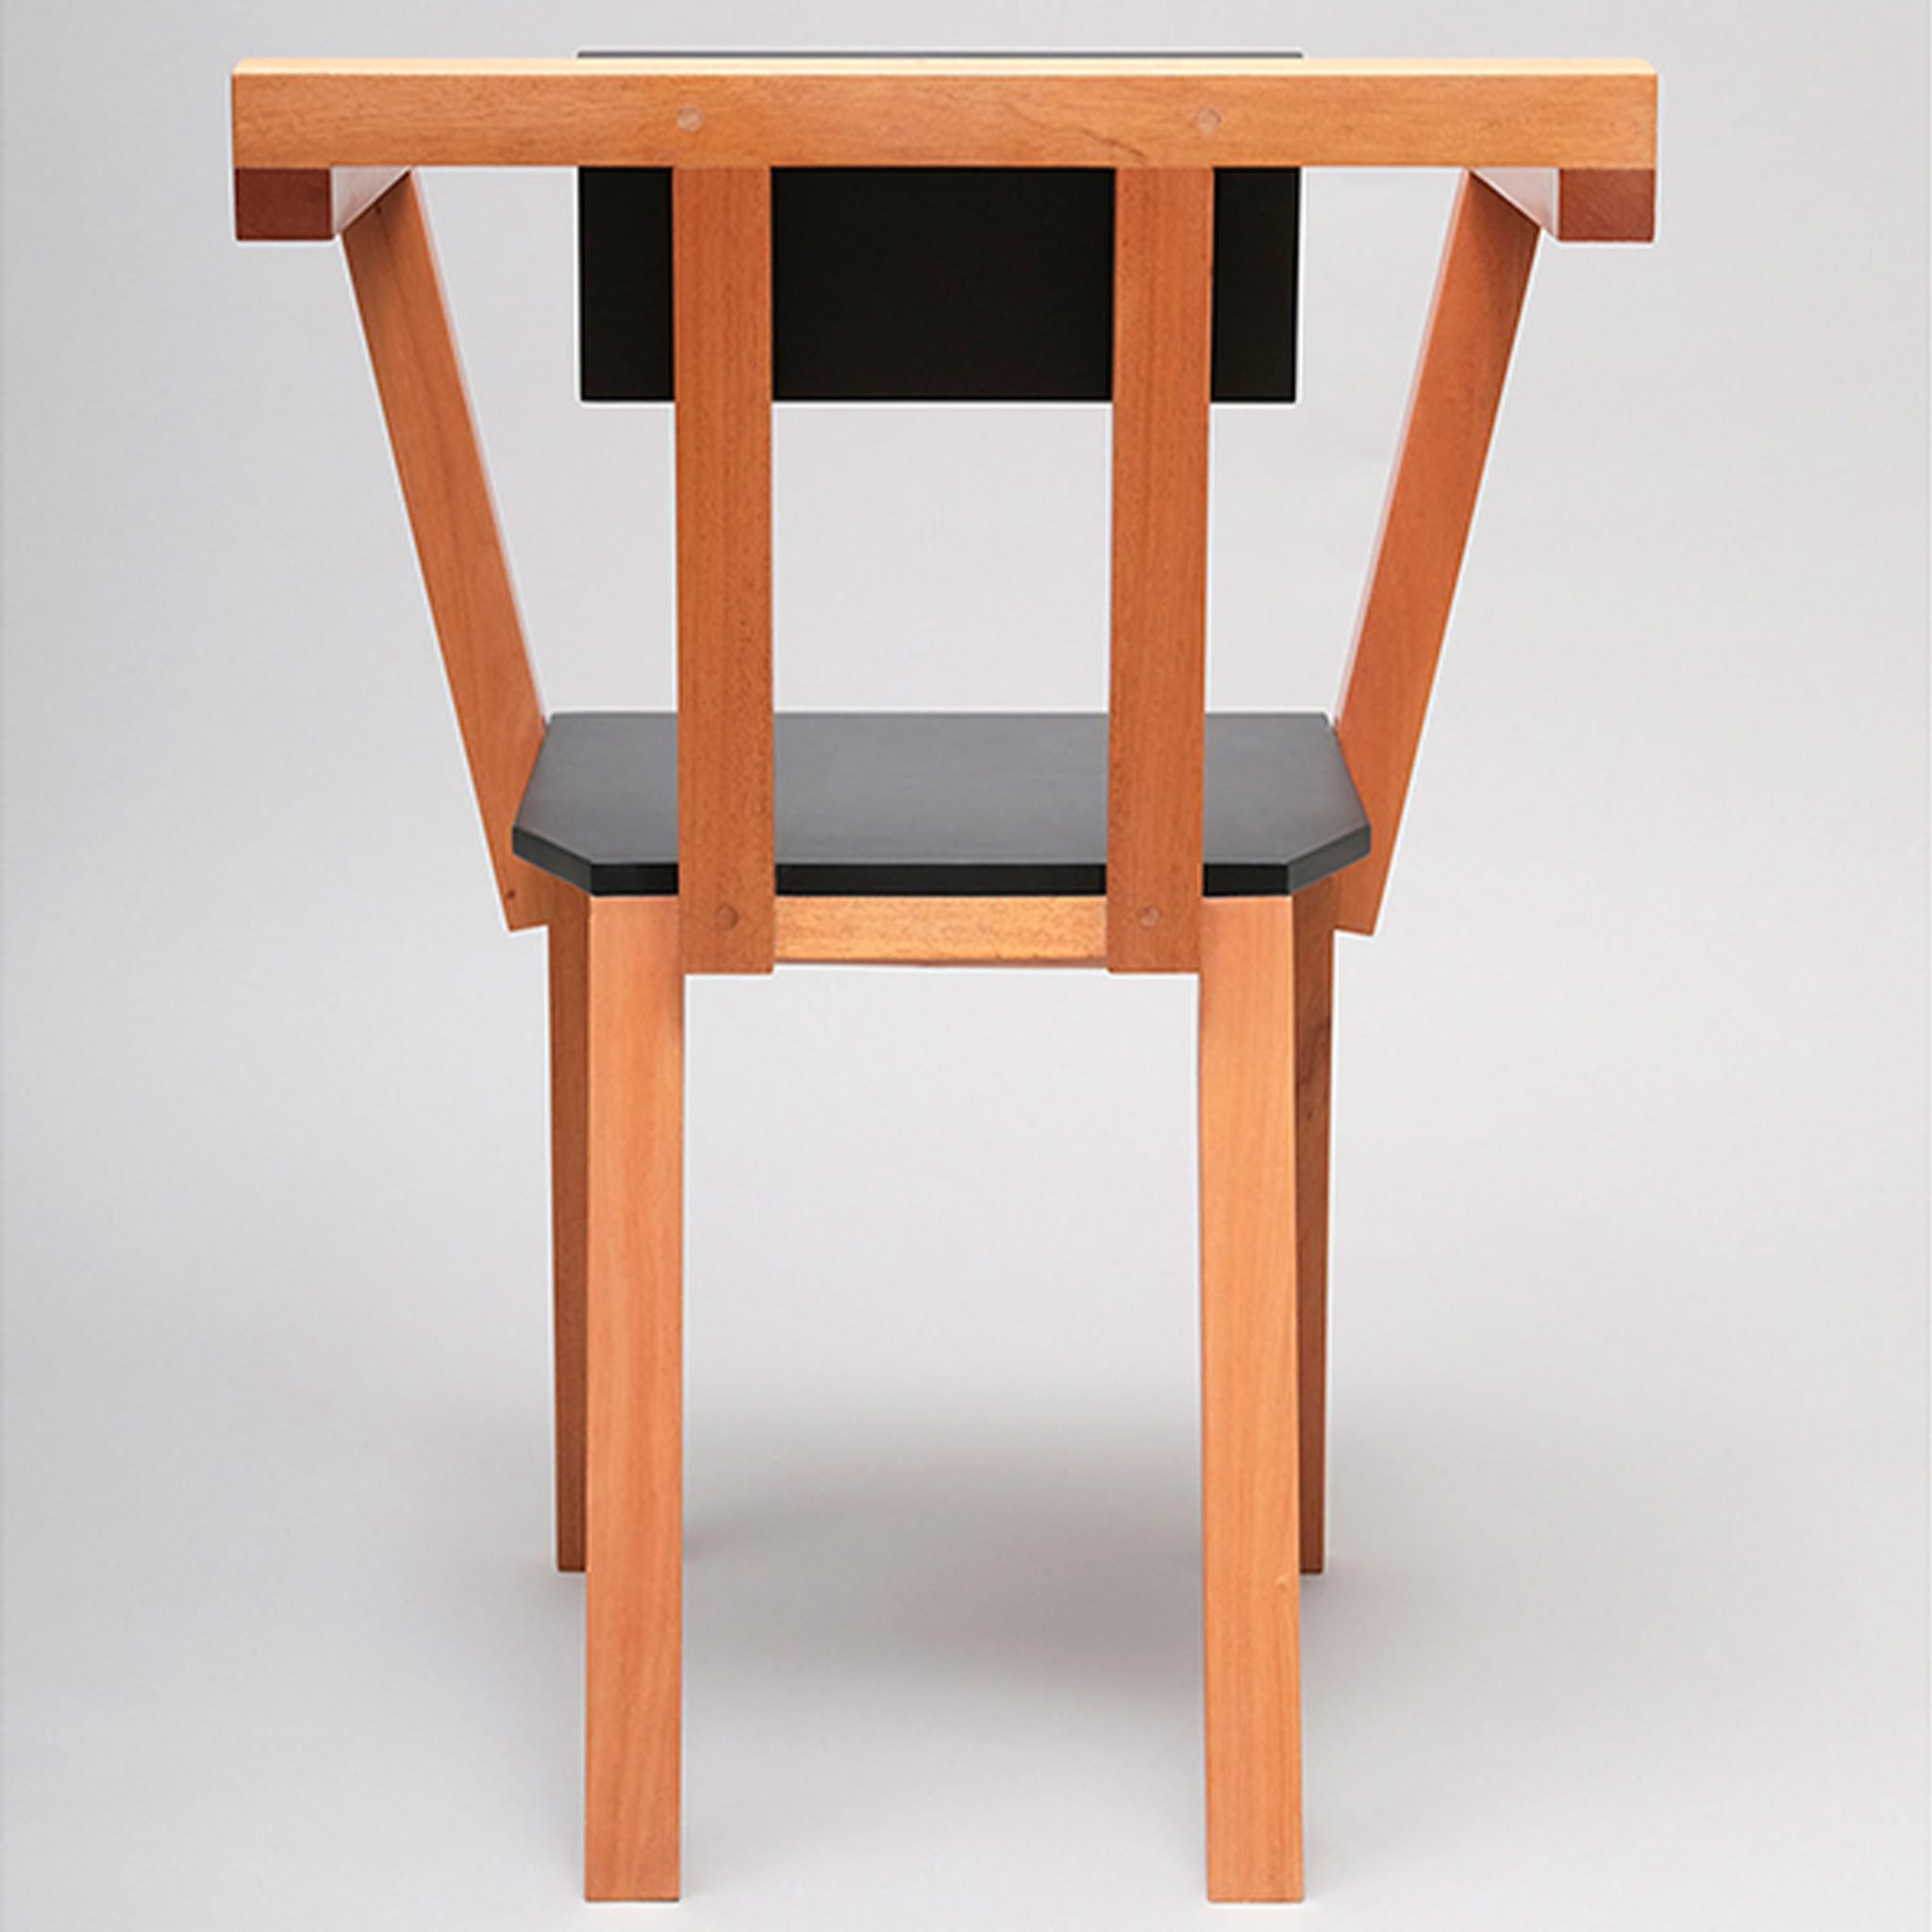 Kaspa Negra Chair With Arms By Clemence Seilles - Alternative view 5